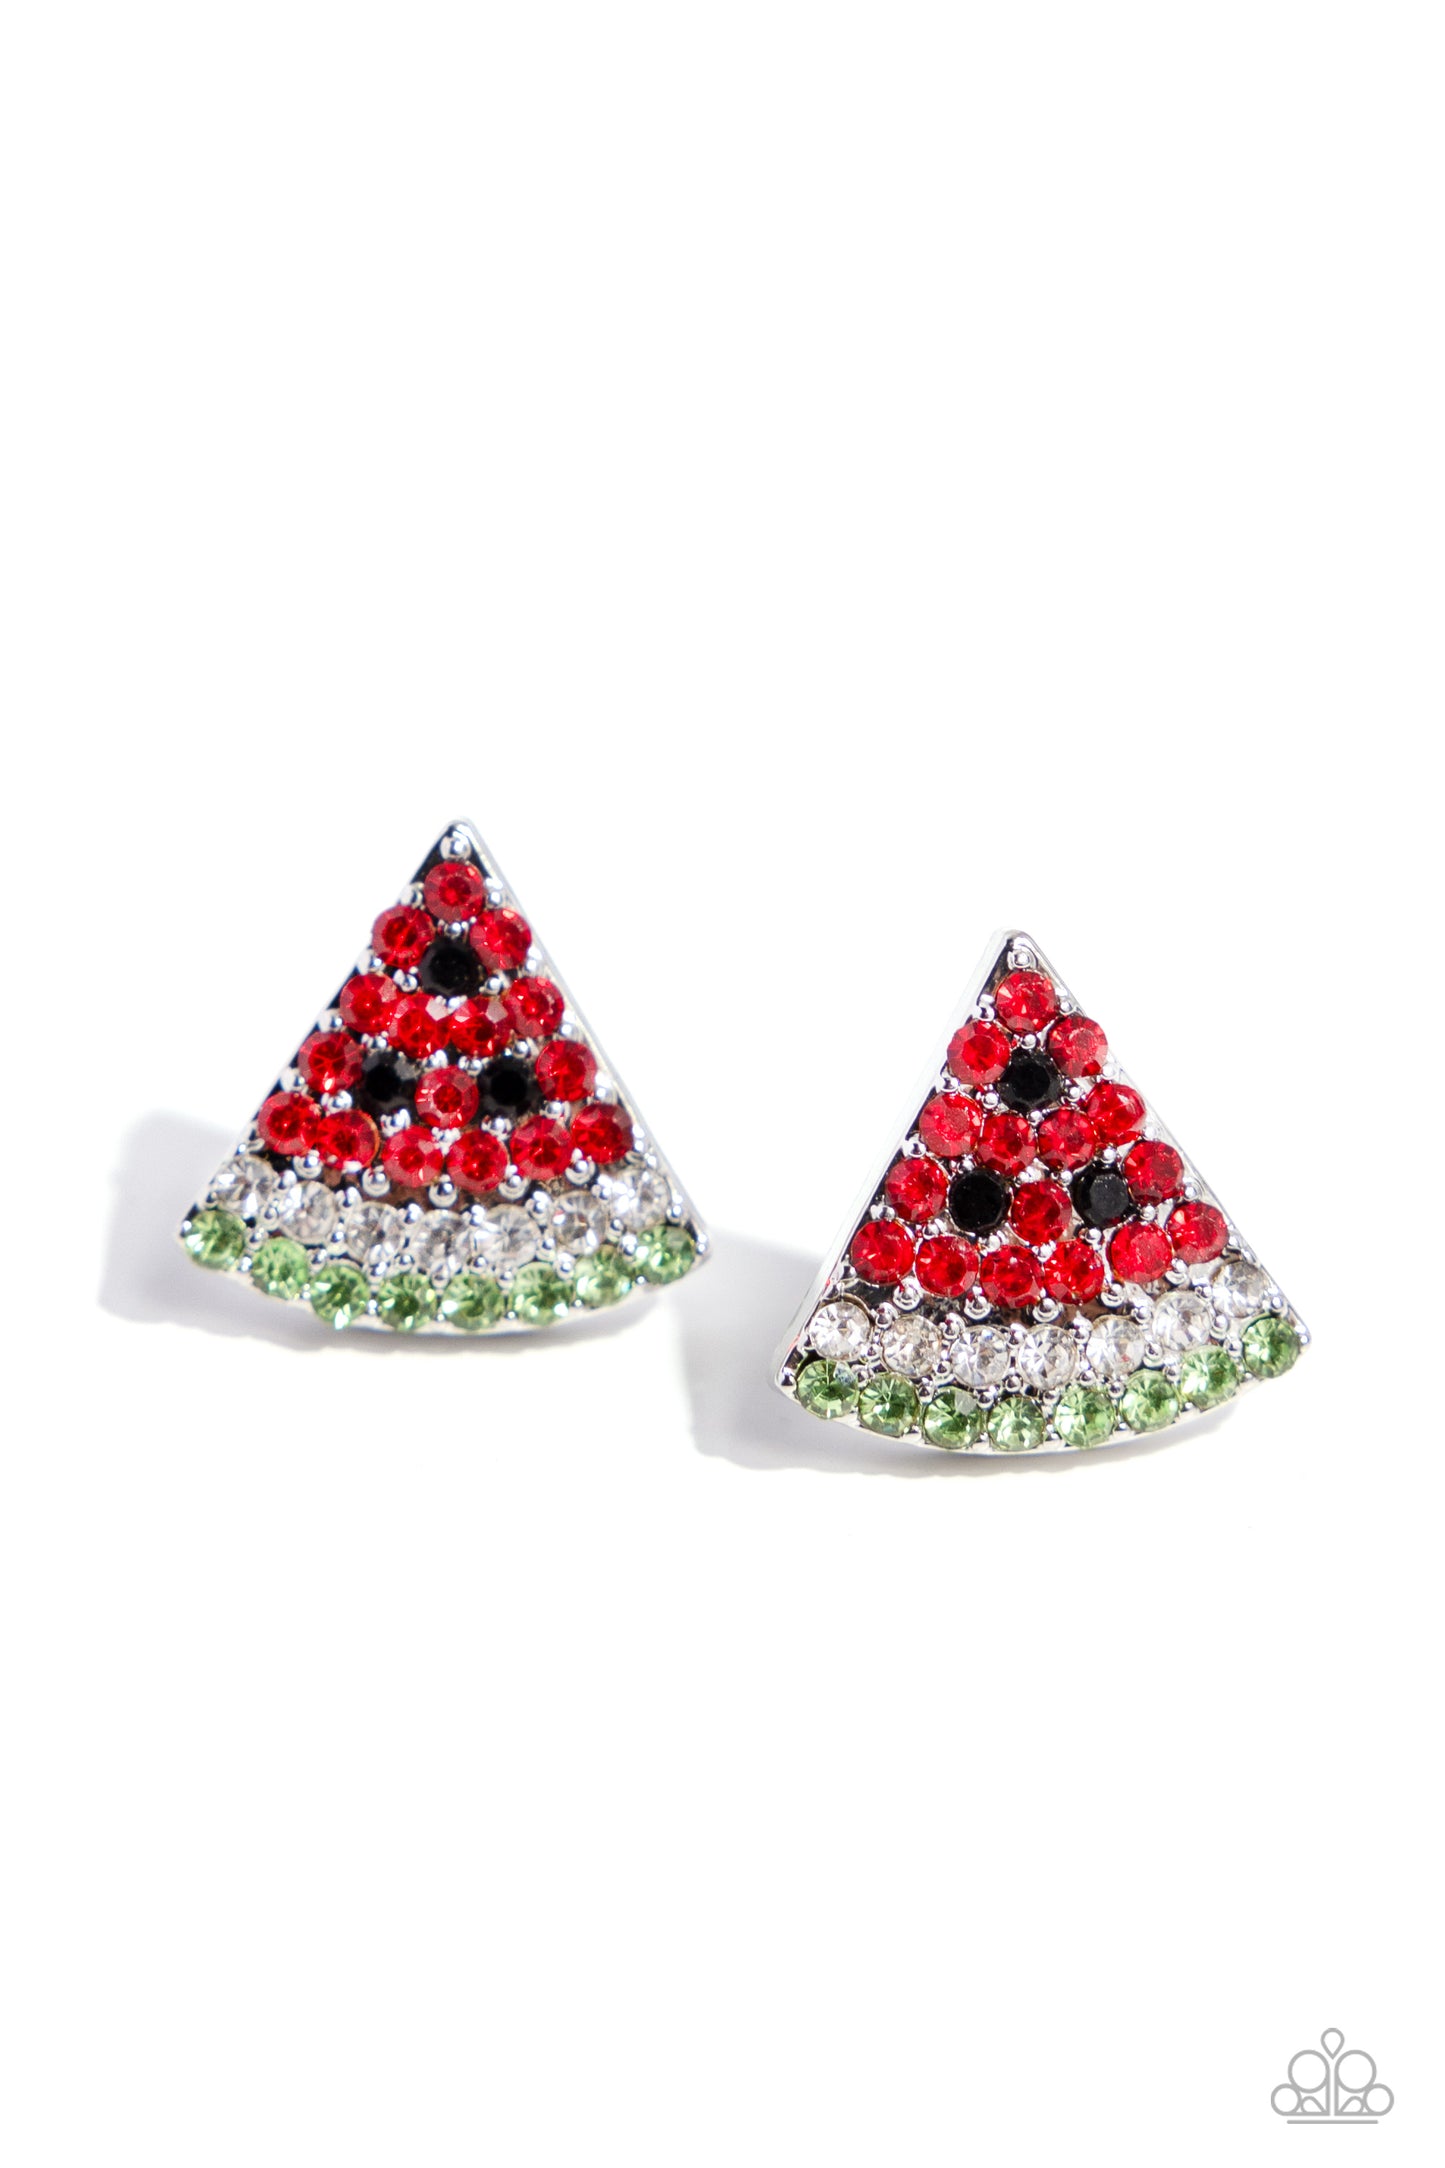 <p>Paparazzi Accessories - Watermelon Slice - Red Earrings featuring red, black, white, and green rhinestones, a silver watermelon-inspired post glitters from the ear for a fresh, fruity design. Earring attaches to a standard post fitting.</p> <p><i>Sold as one pair of post earrings.</i></p>